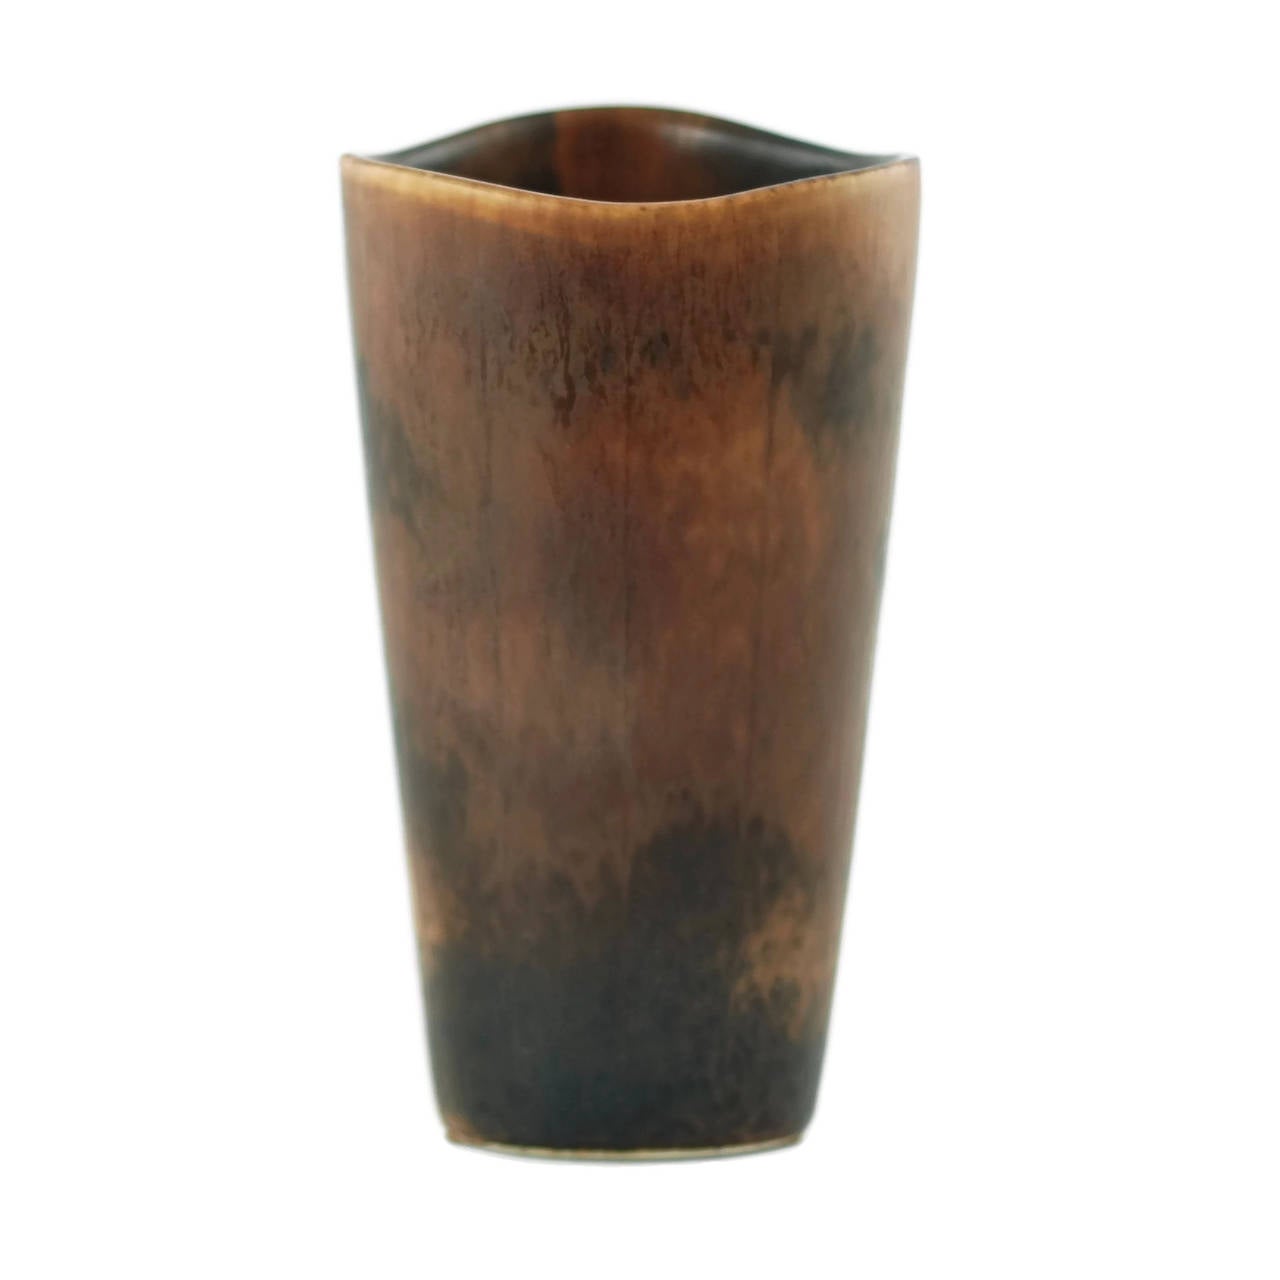 This stoneware vase was made by Rörstrand of Sweden, founded in 1726. The piece was designed by Gunnar Nylund (1904-1997), Rörstrand's artistic director. The vase has a rounded triangular form with a scalloped edge rim and is finished in a mottled